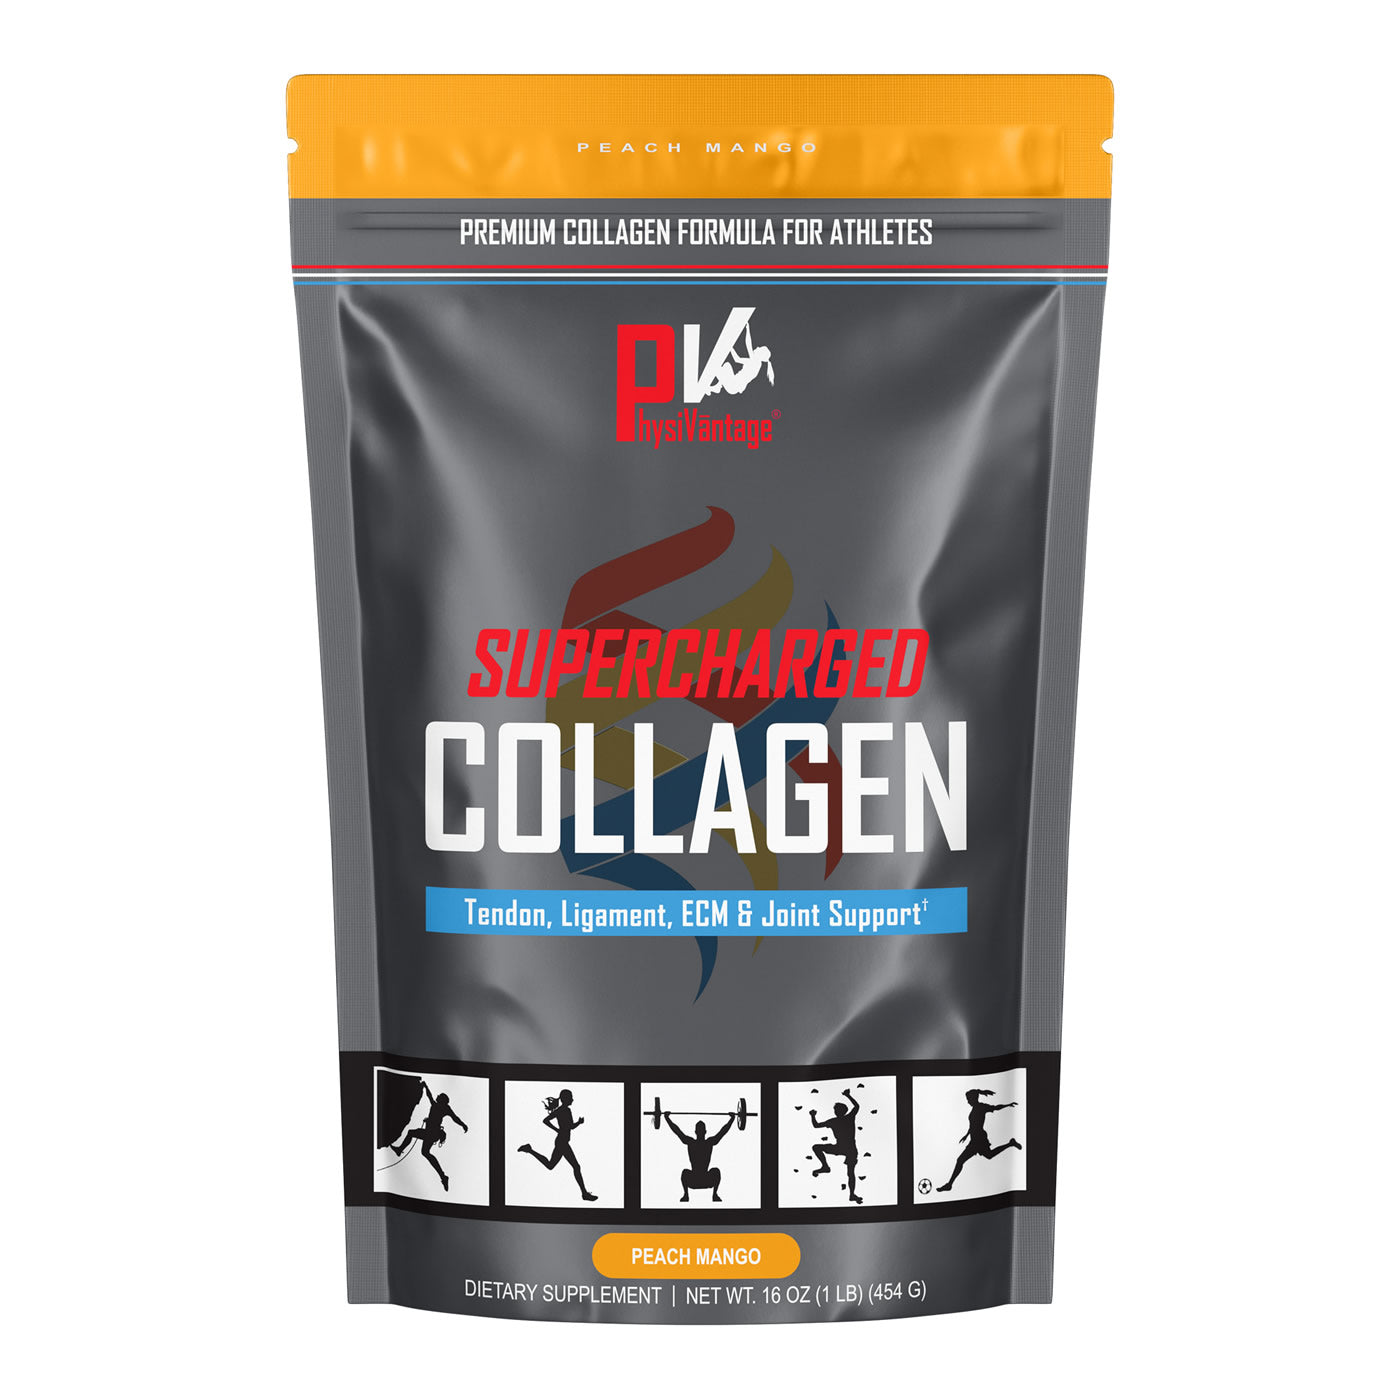 Supercharged Collagen - Support Joint, Tendon, and Skin Quality and Health  - by PhysiVāntage®